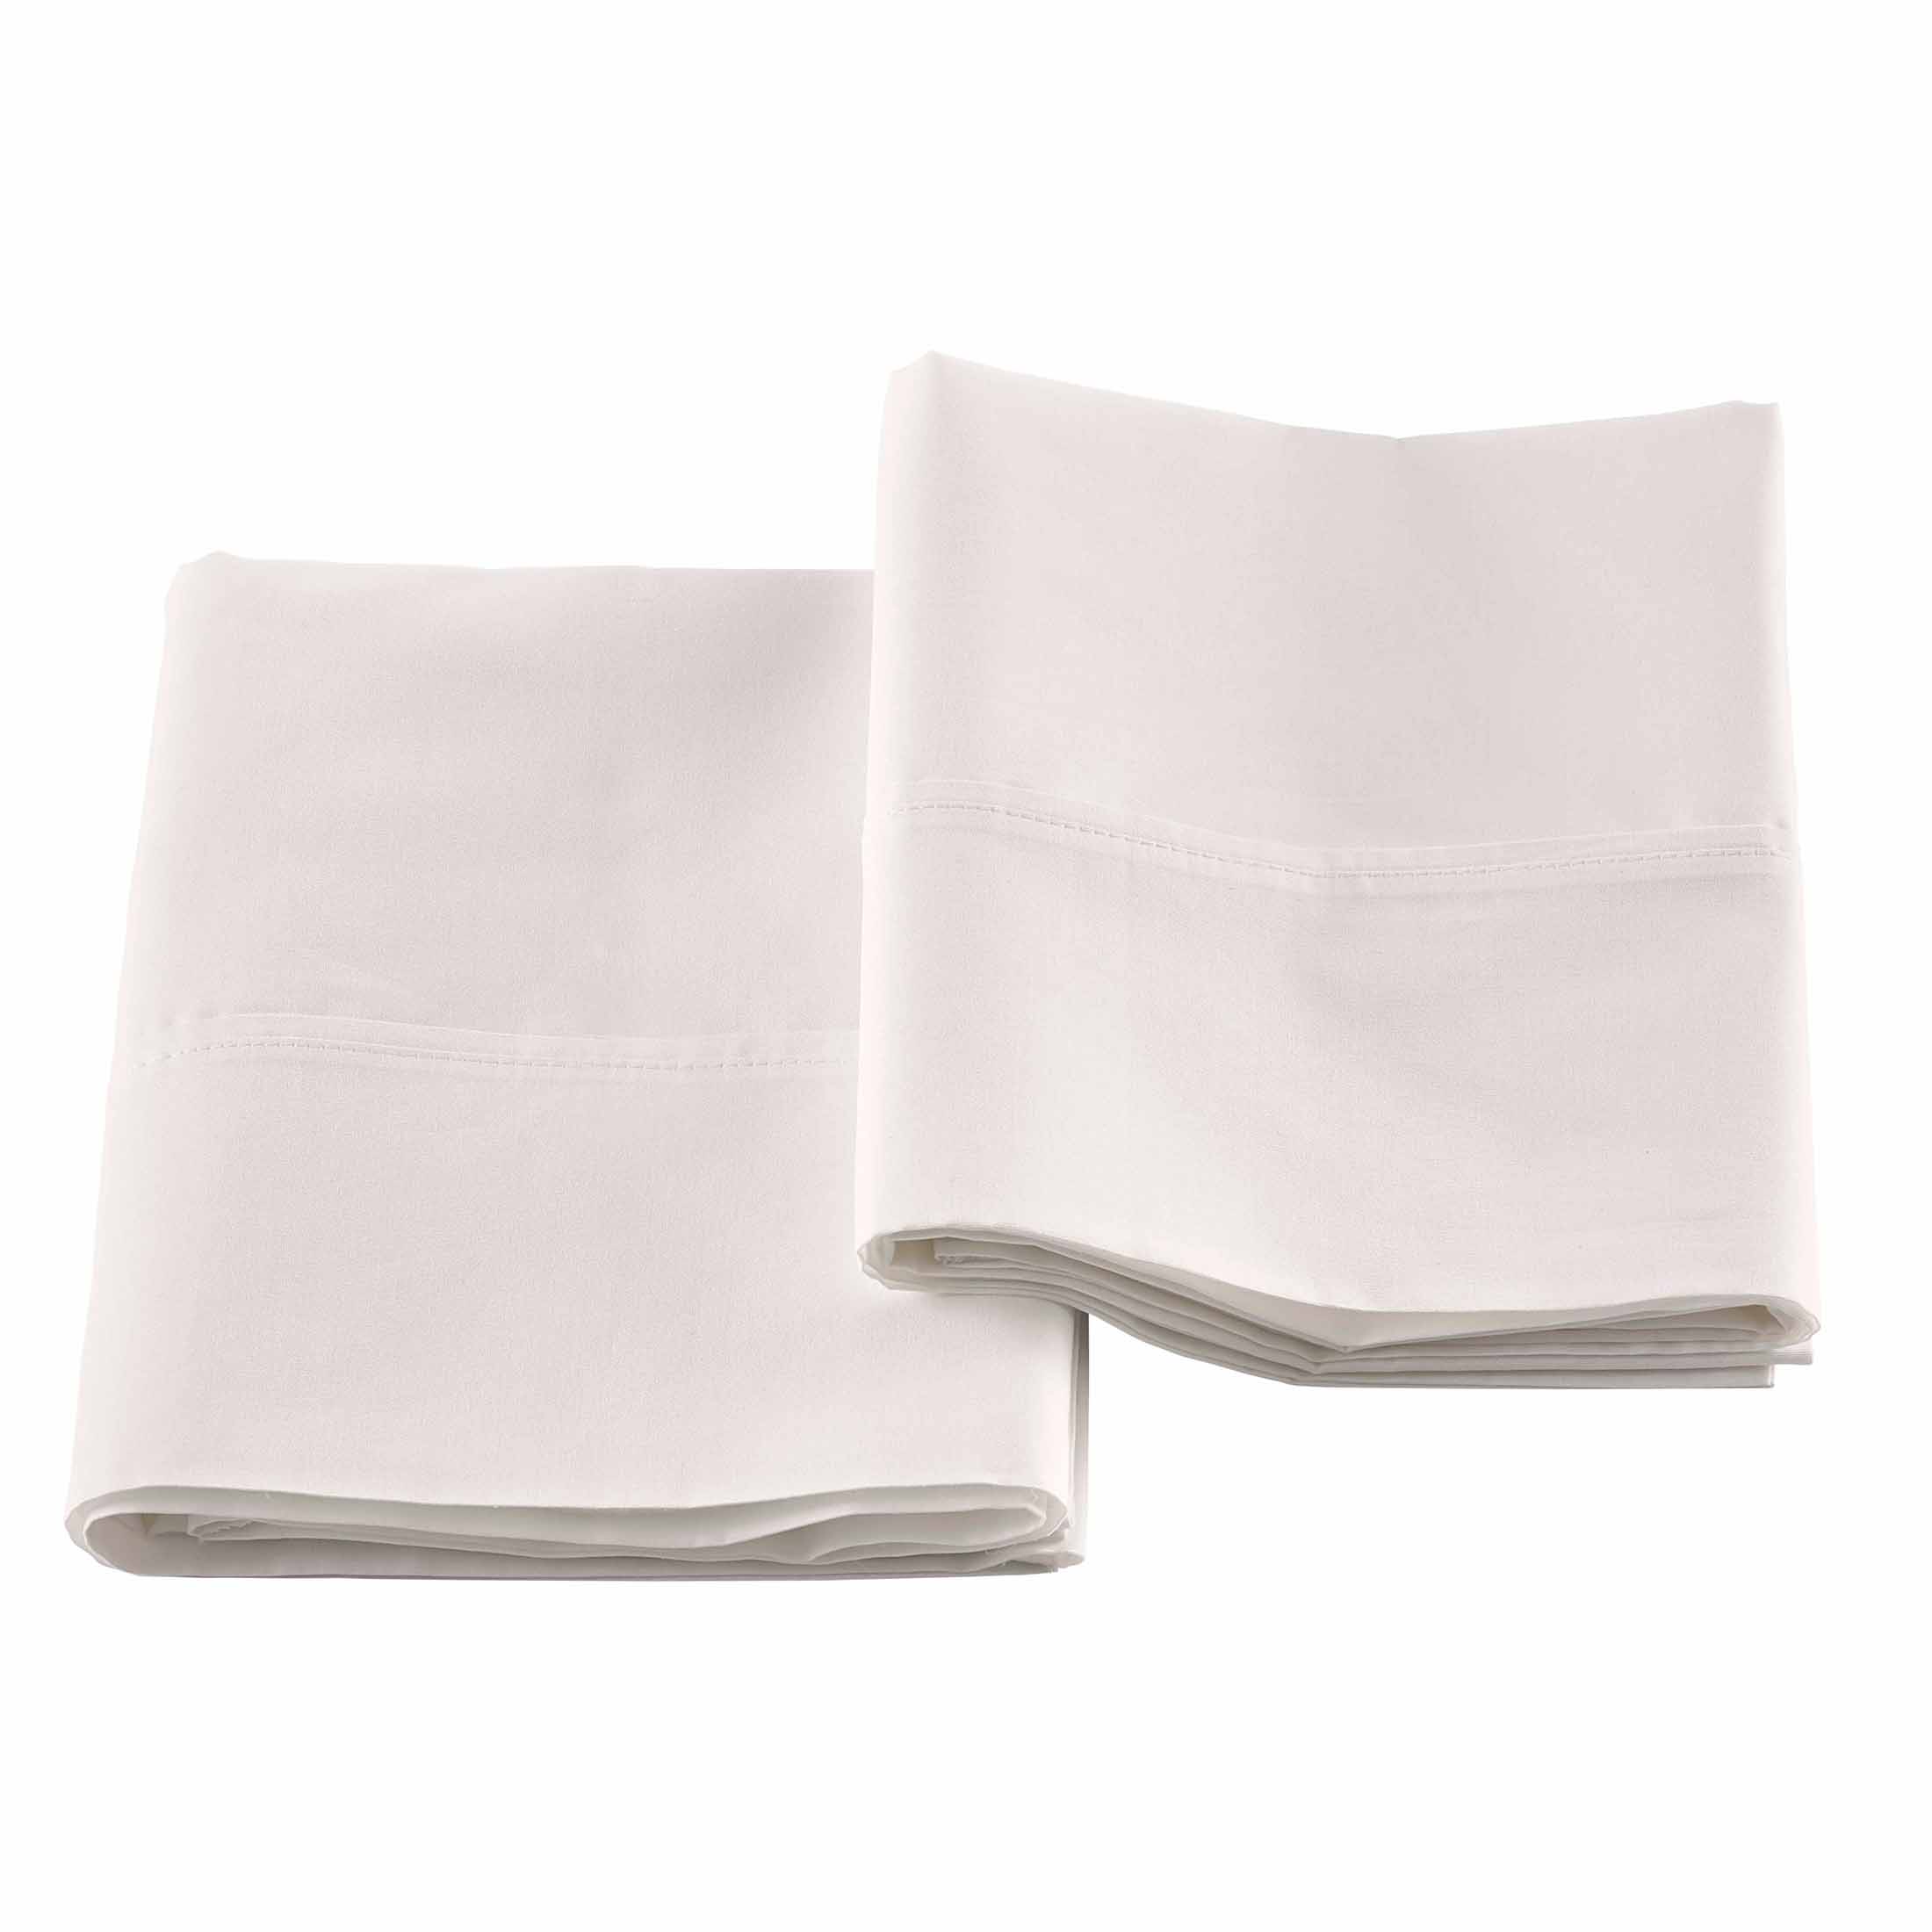 Better Homes & Gardens Cool & Crisp 4-Piece 300 Thread Count Arctic White Cotton Percale Sheet Set, Full - image 4 of 9